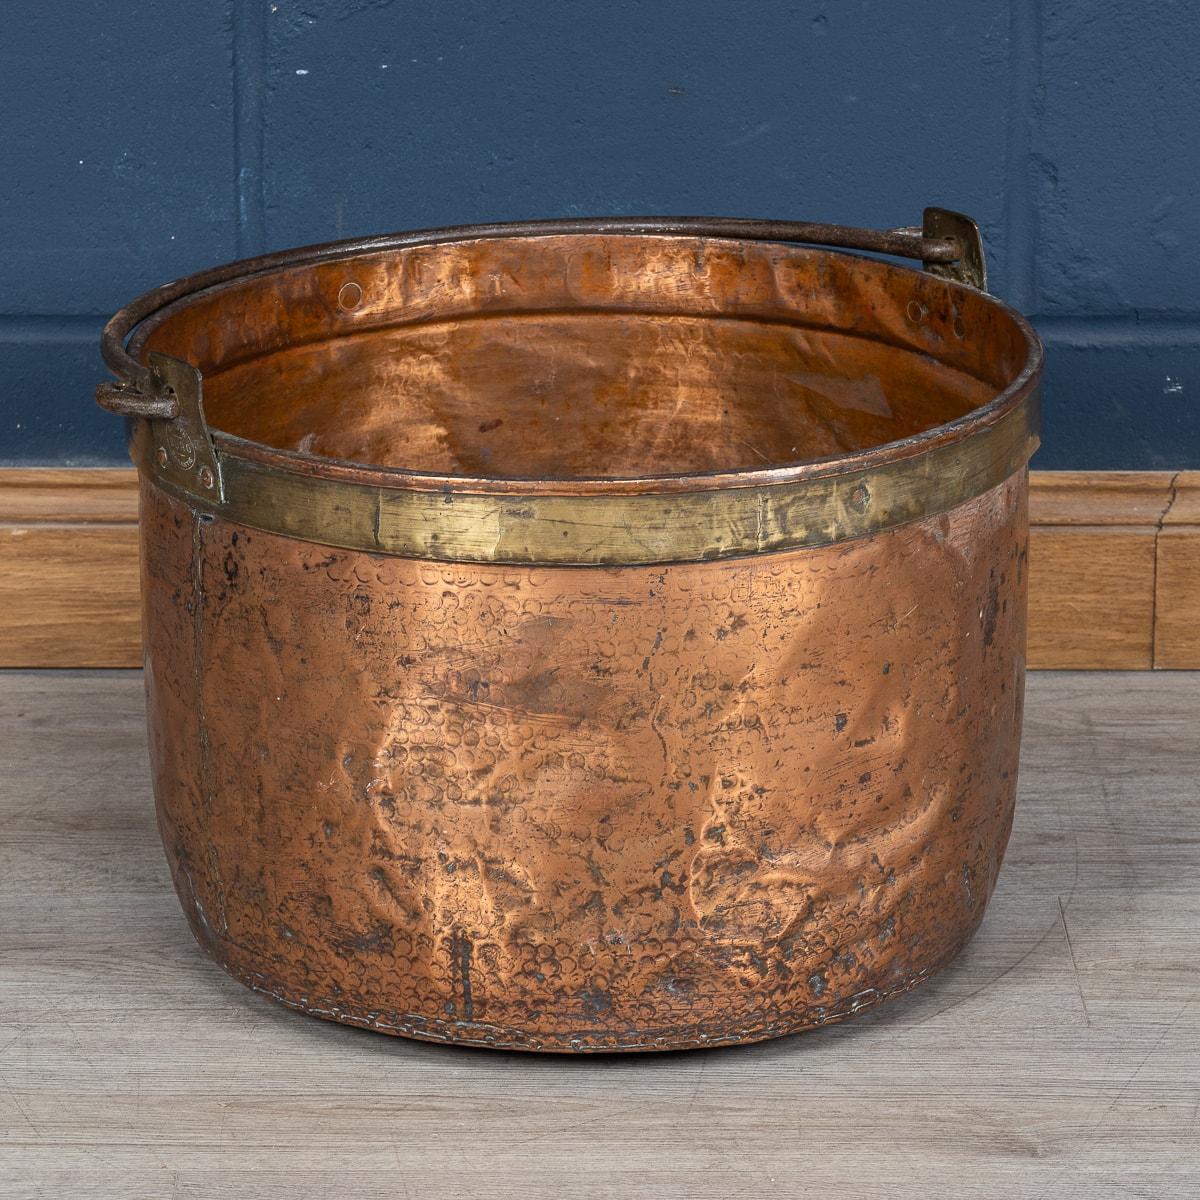 19th Century English Copper Cooking Pot In Fair Condition For Sale In Royal Tunbridge Wells, Kent